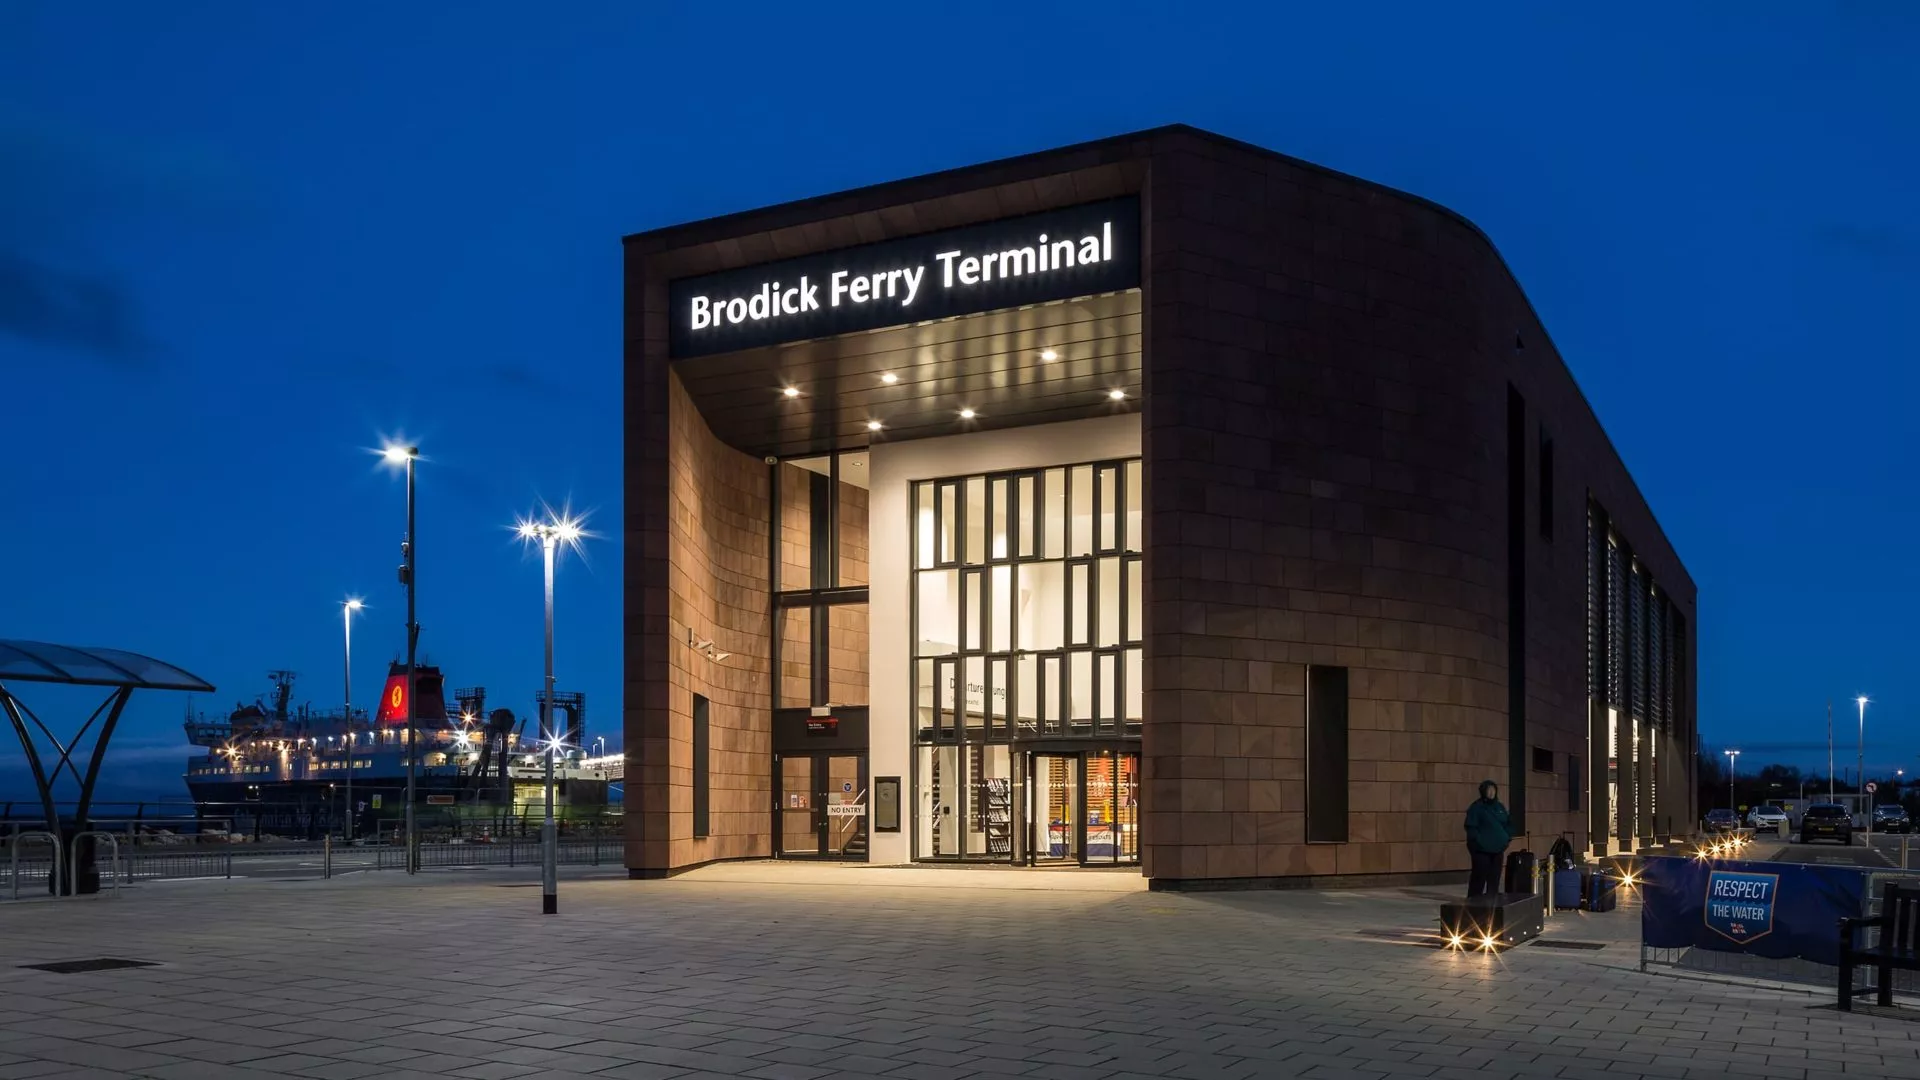 brodick ferry terminal building exterior front entrance at night